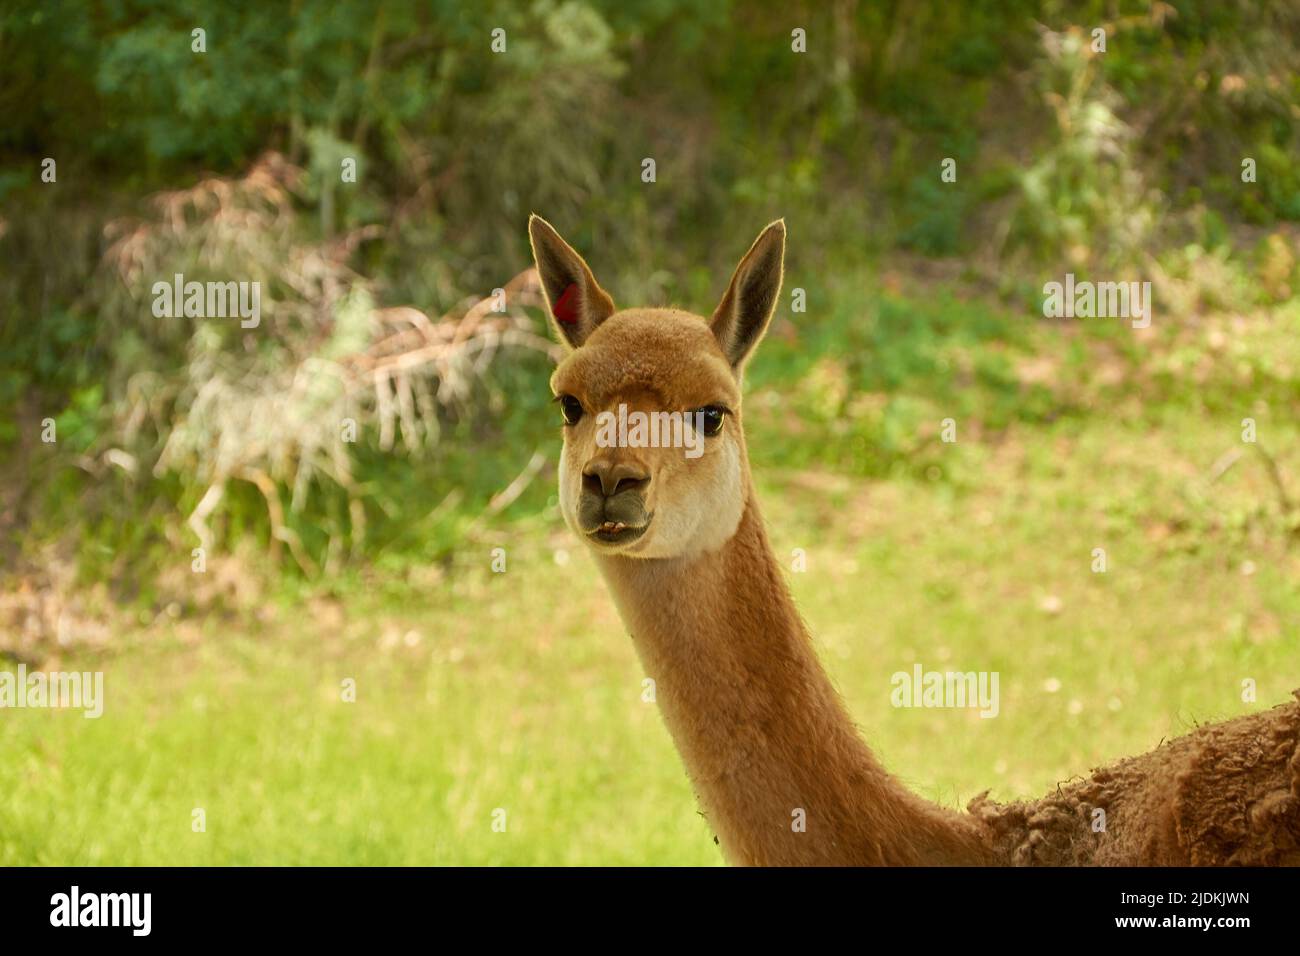 Lama vicugna is grazing in a pasture. Portrait of a vicuna. A species of artiodactyl mammals of the camel family Stock Photo